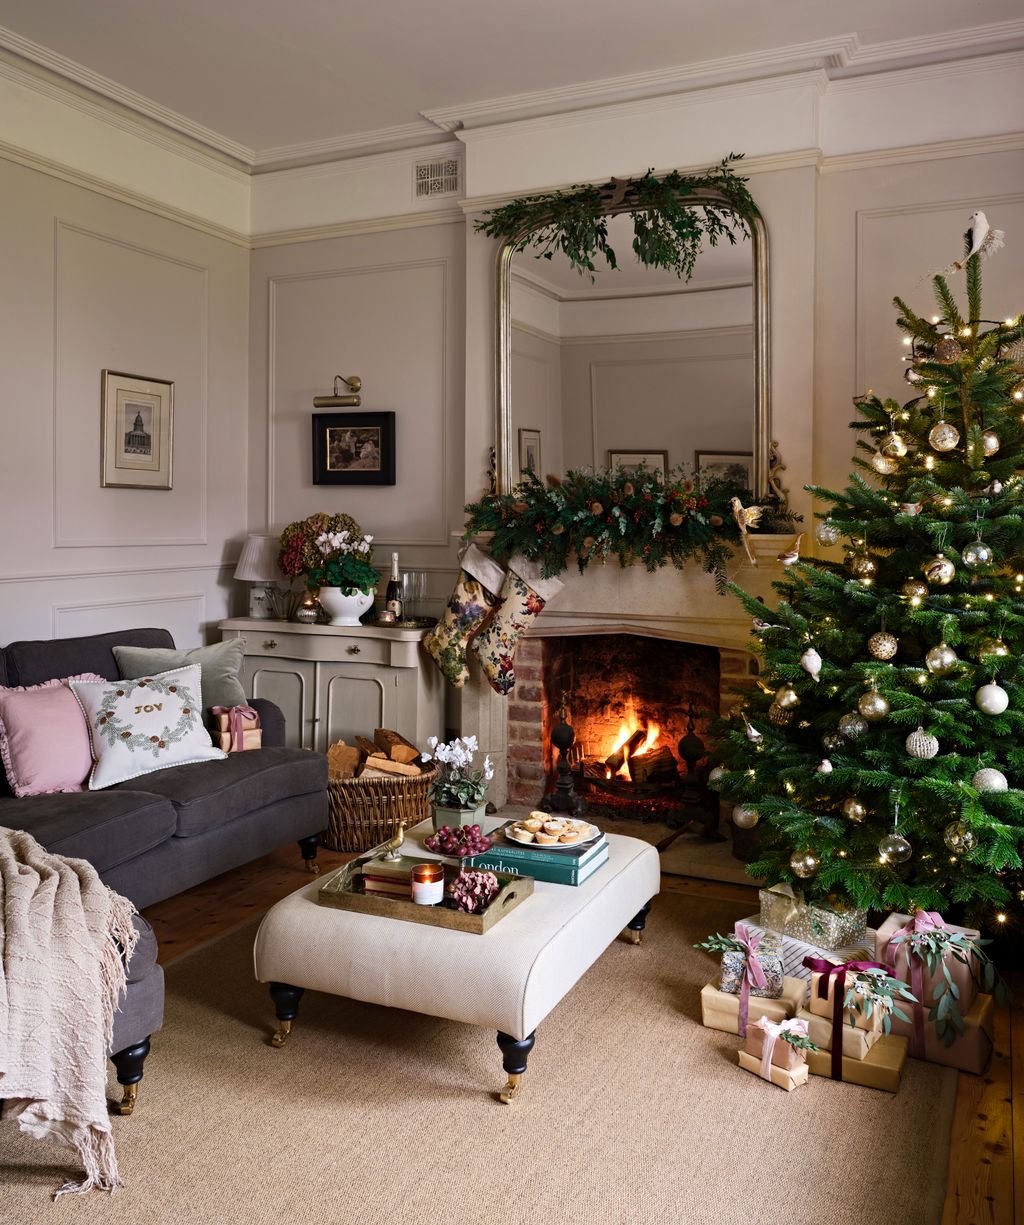 Tour this renovated Victorian country home all ready Christmas